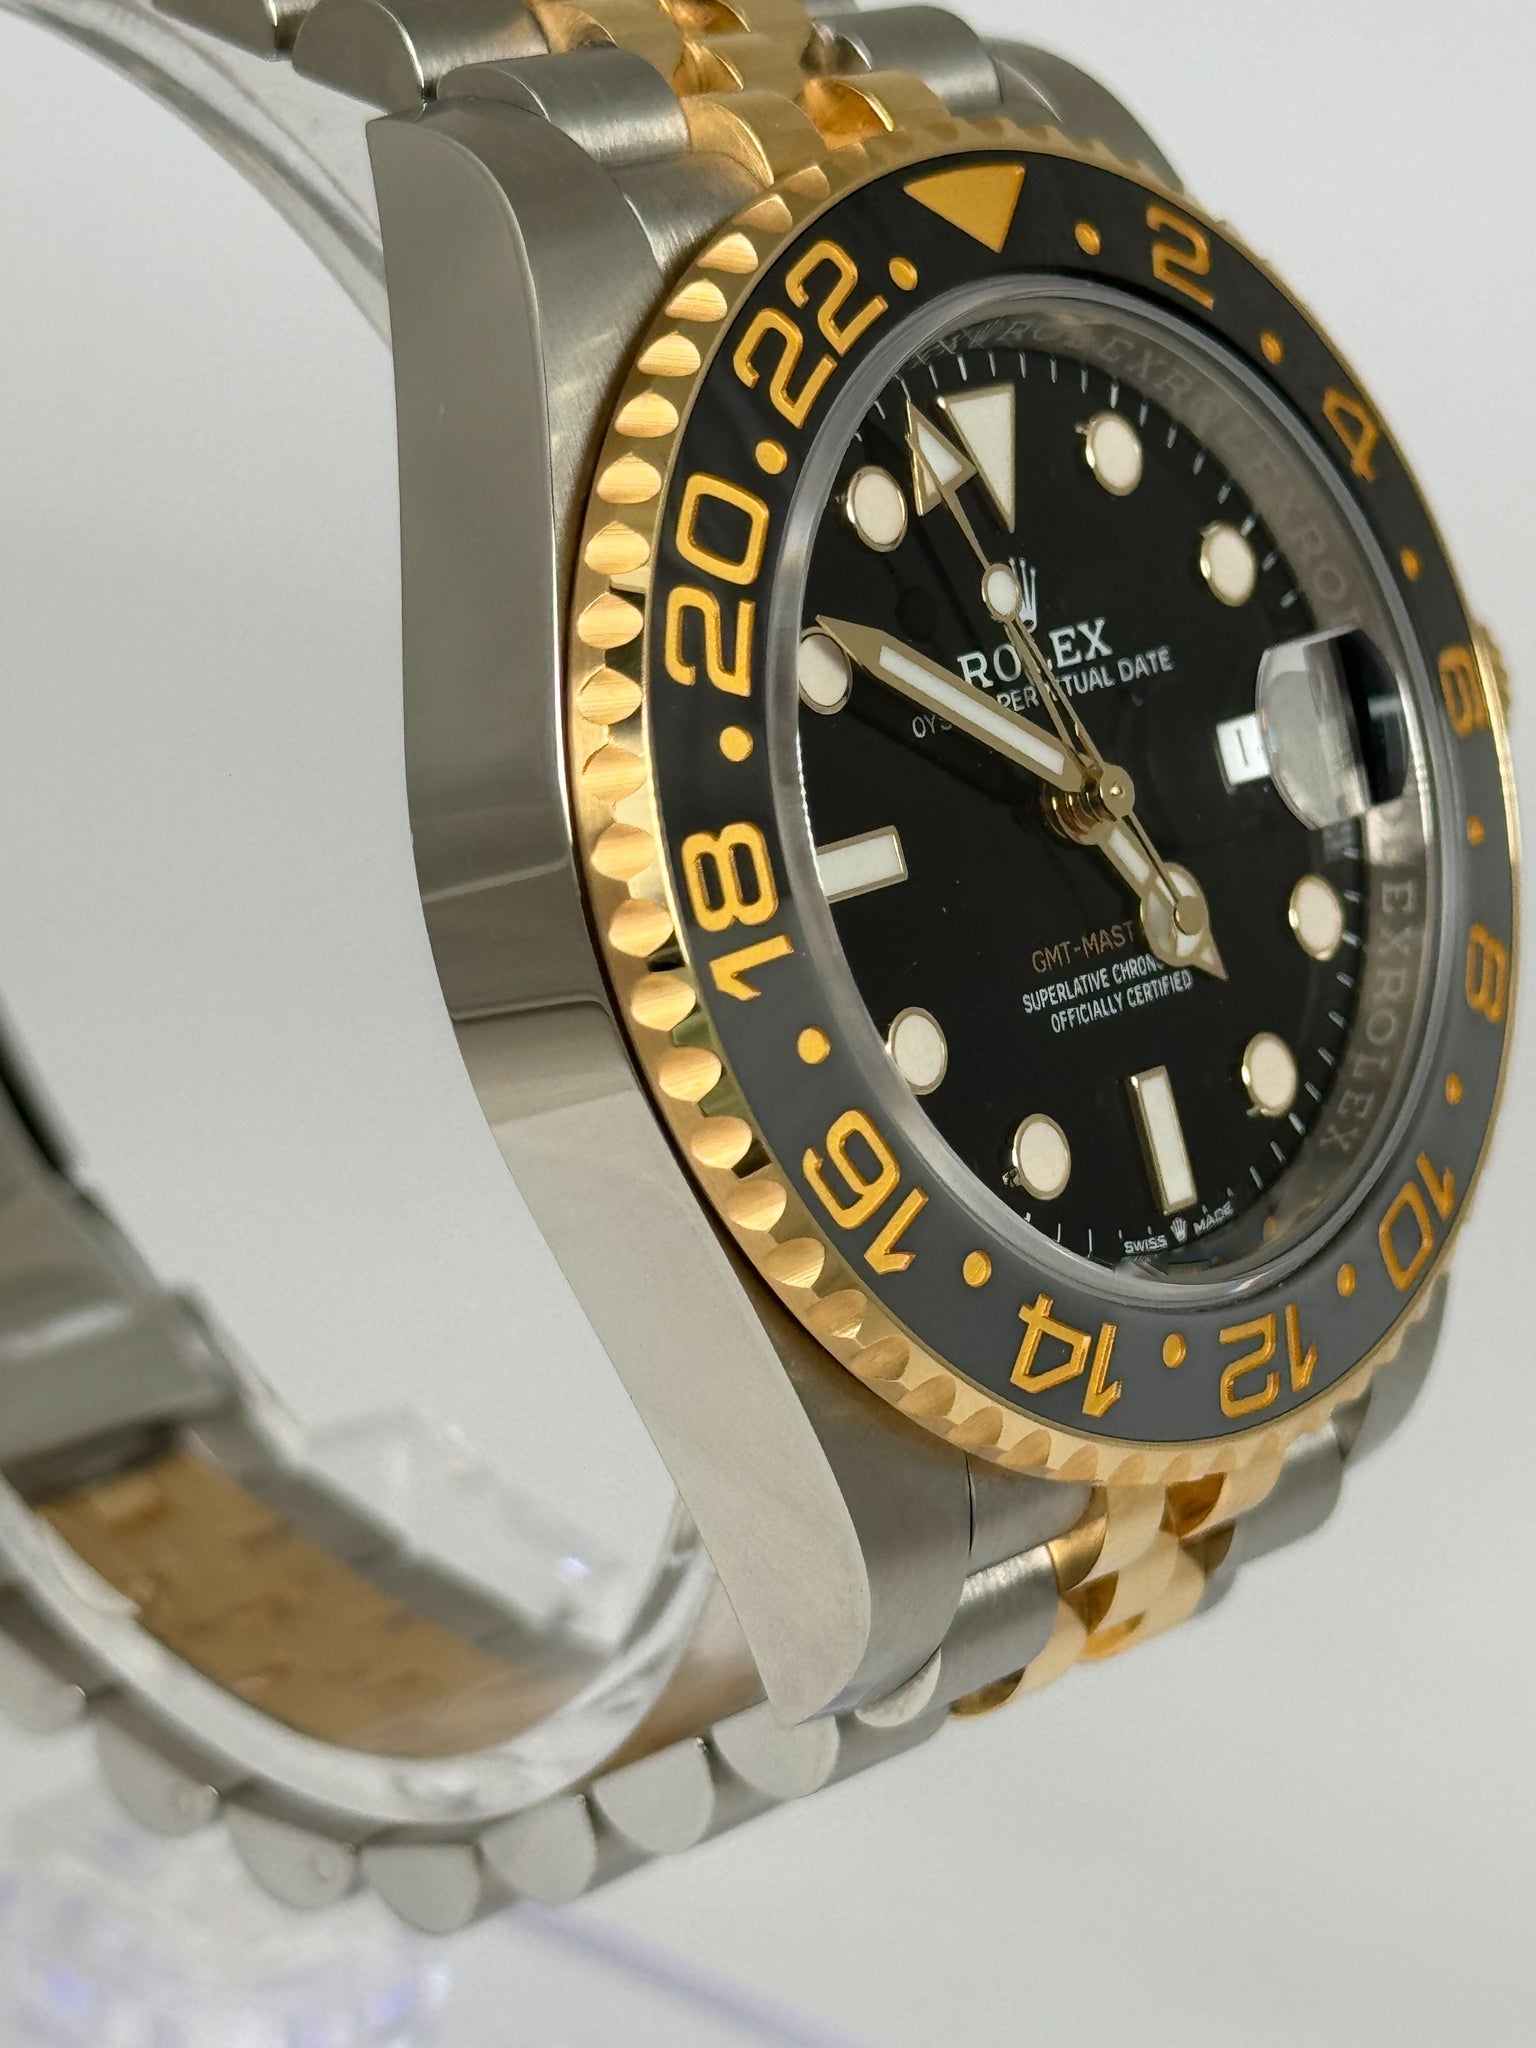 ROLEX GMT MASTER 2 TWO TONE NEW RELEASE 126713GRNR